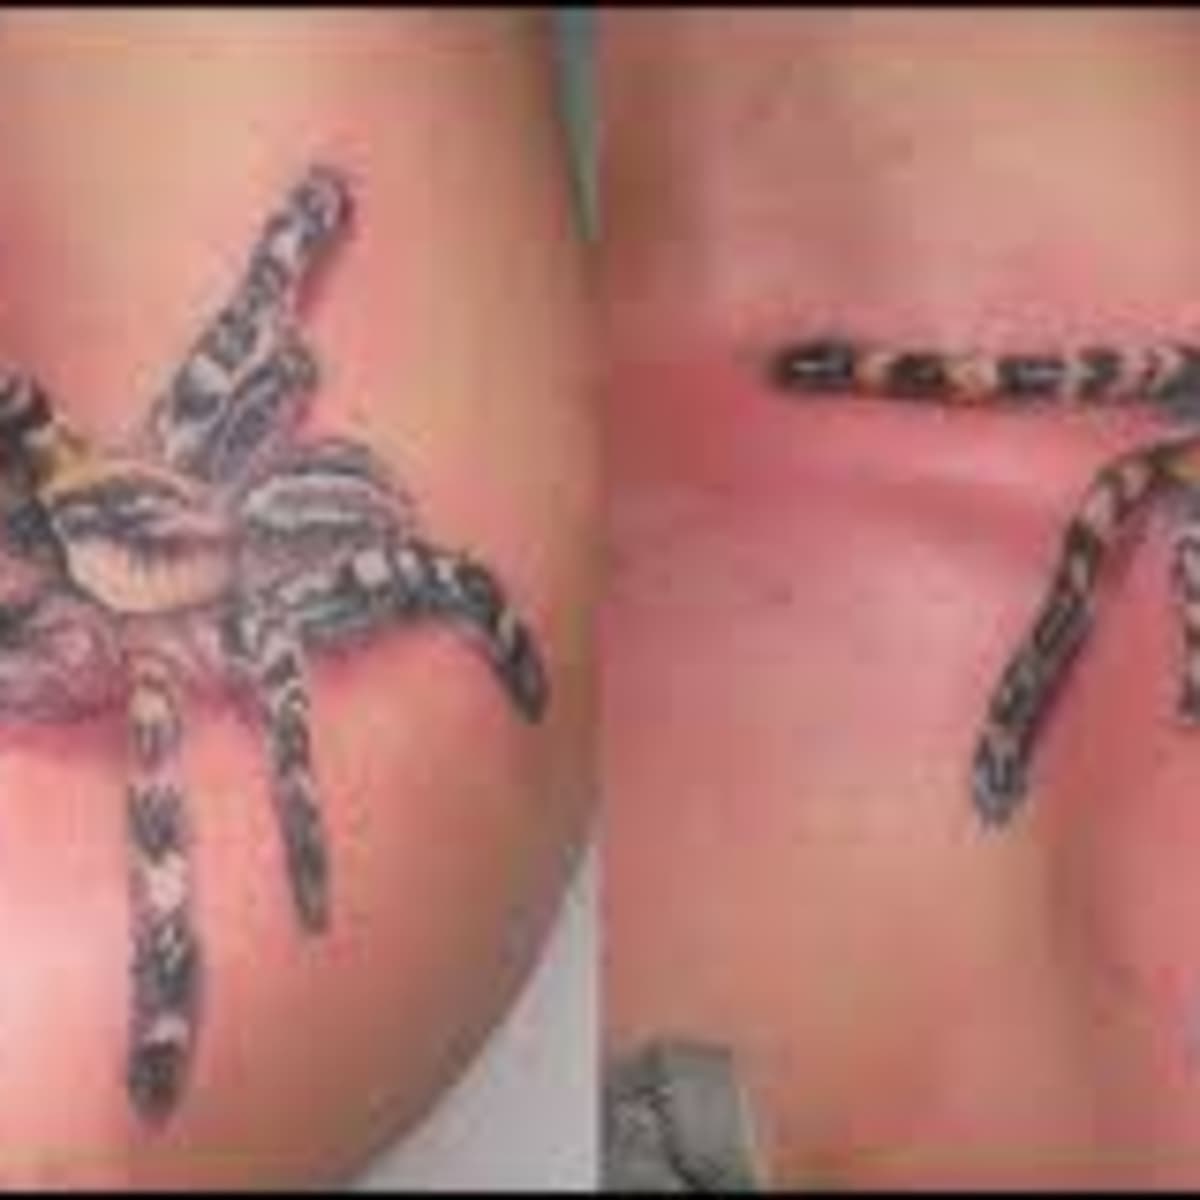 Aggregate 92 about spider tattoo on hand super cool  indaotaonec